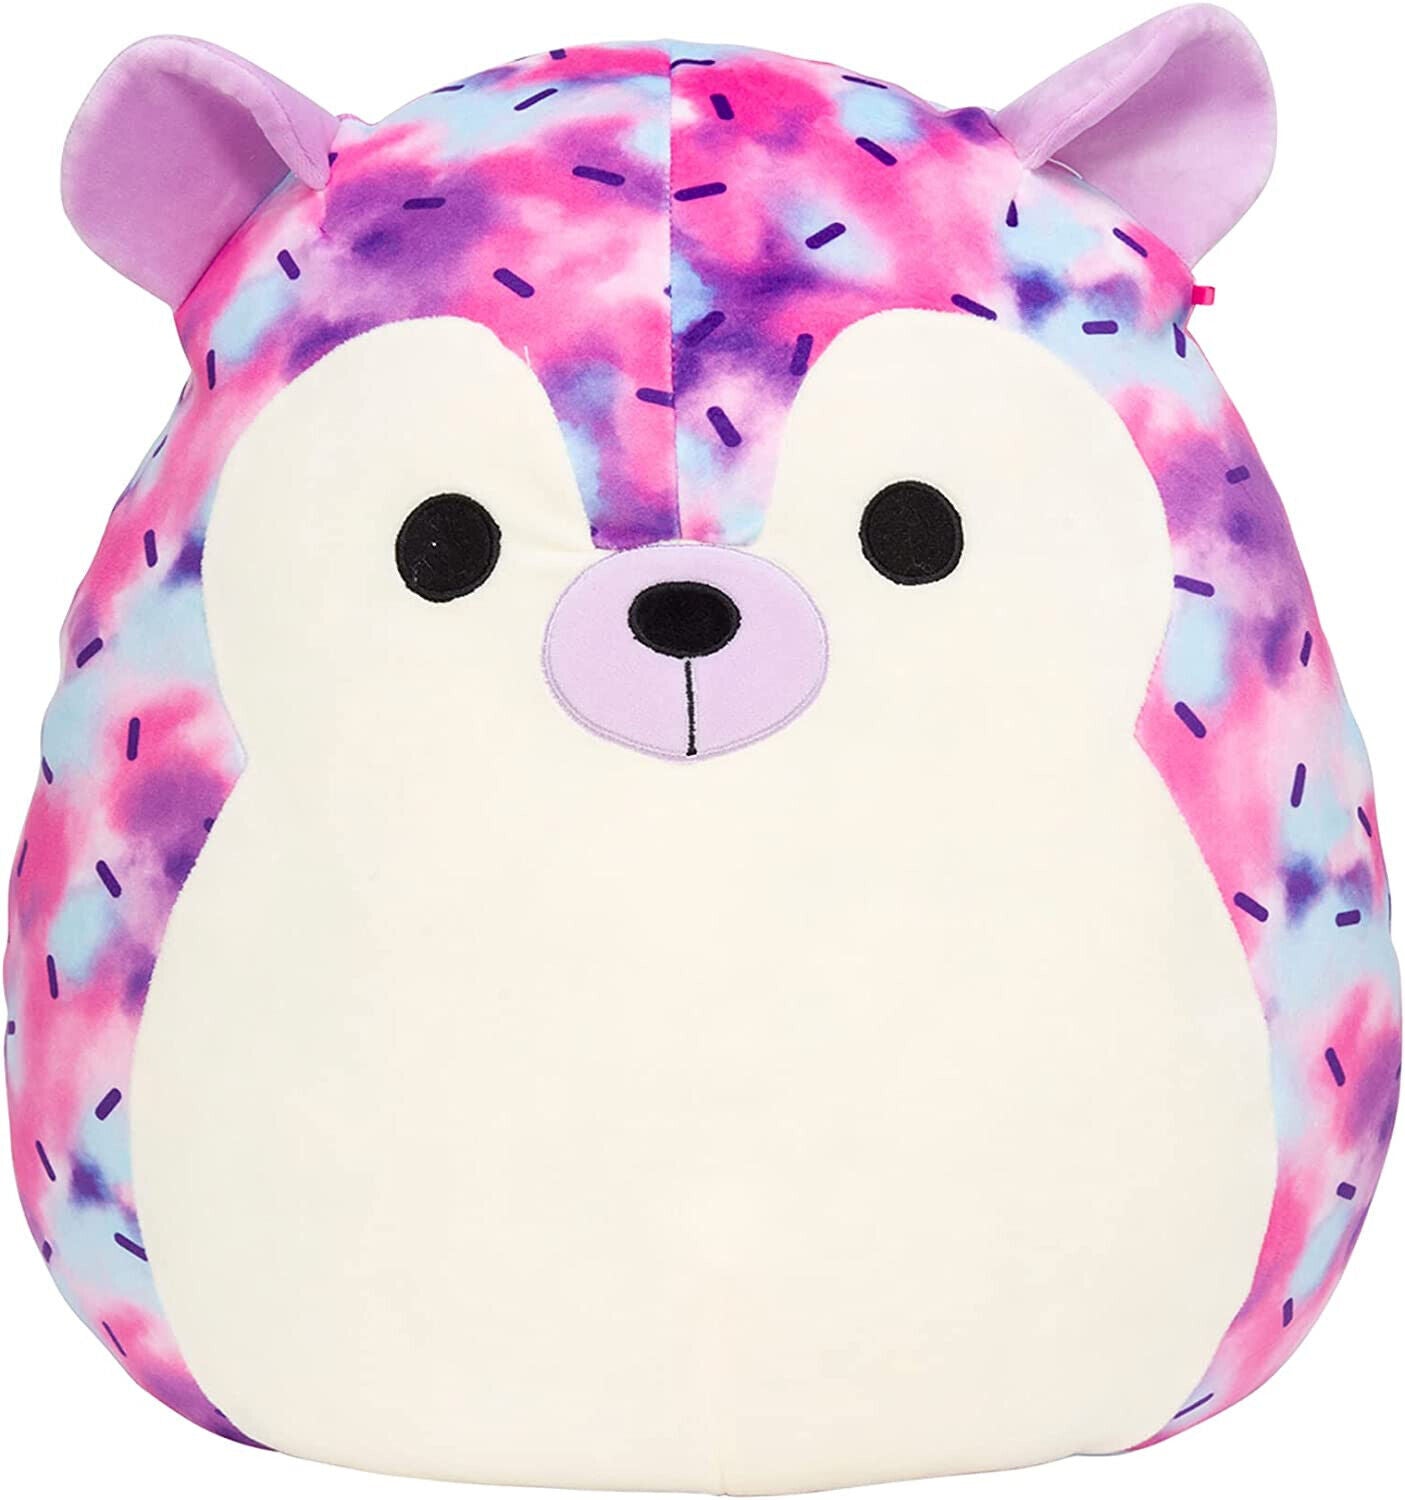 "MUST HAVE Squishmallows 12" Collectable Character Plush - Soft & Cuddly"